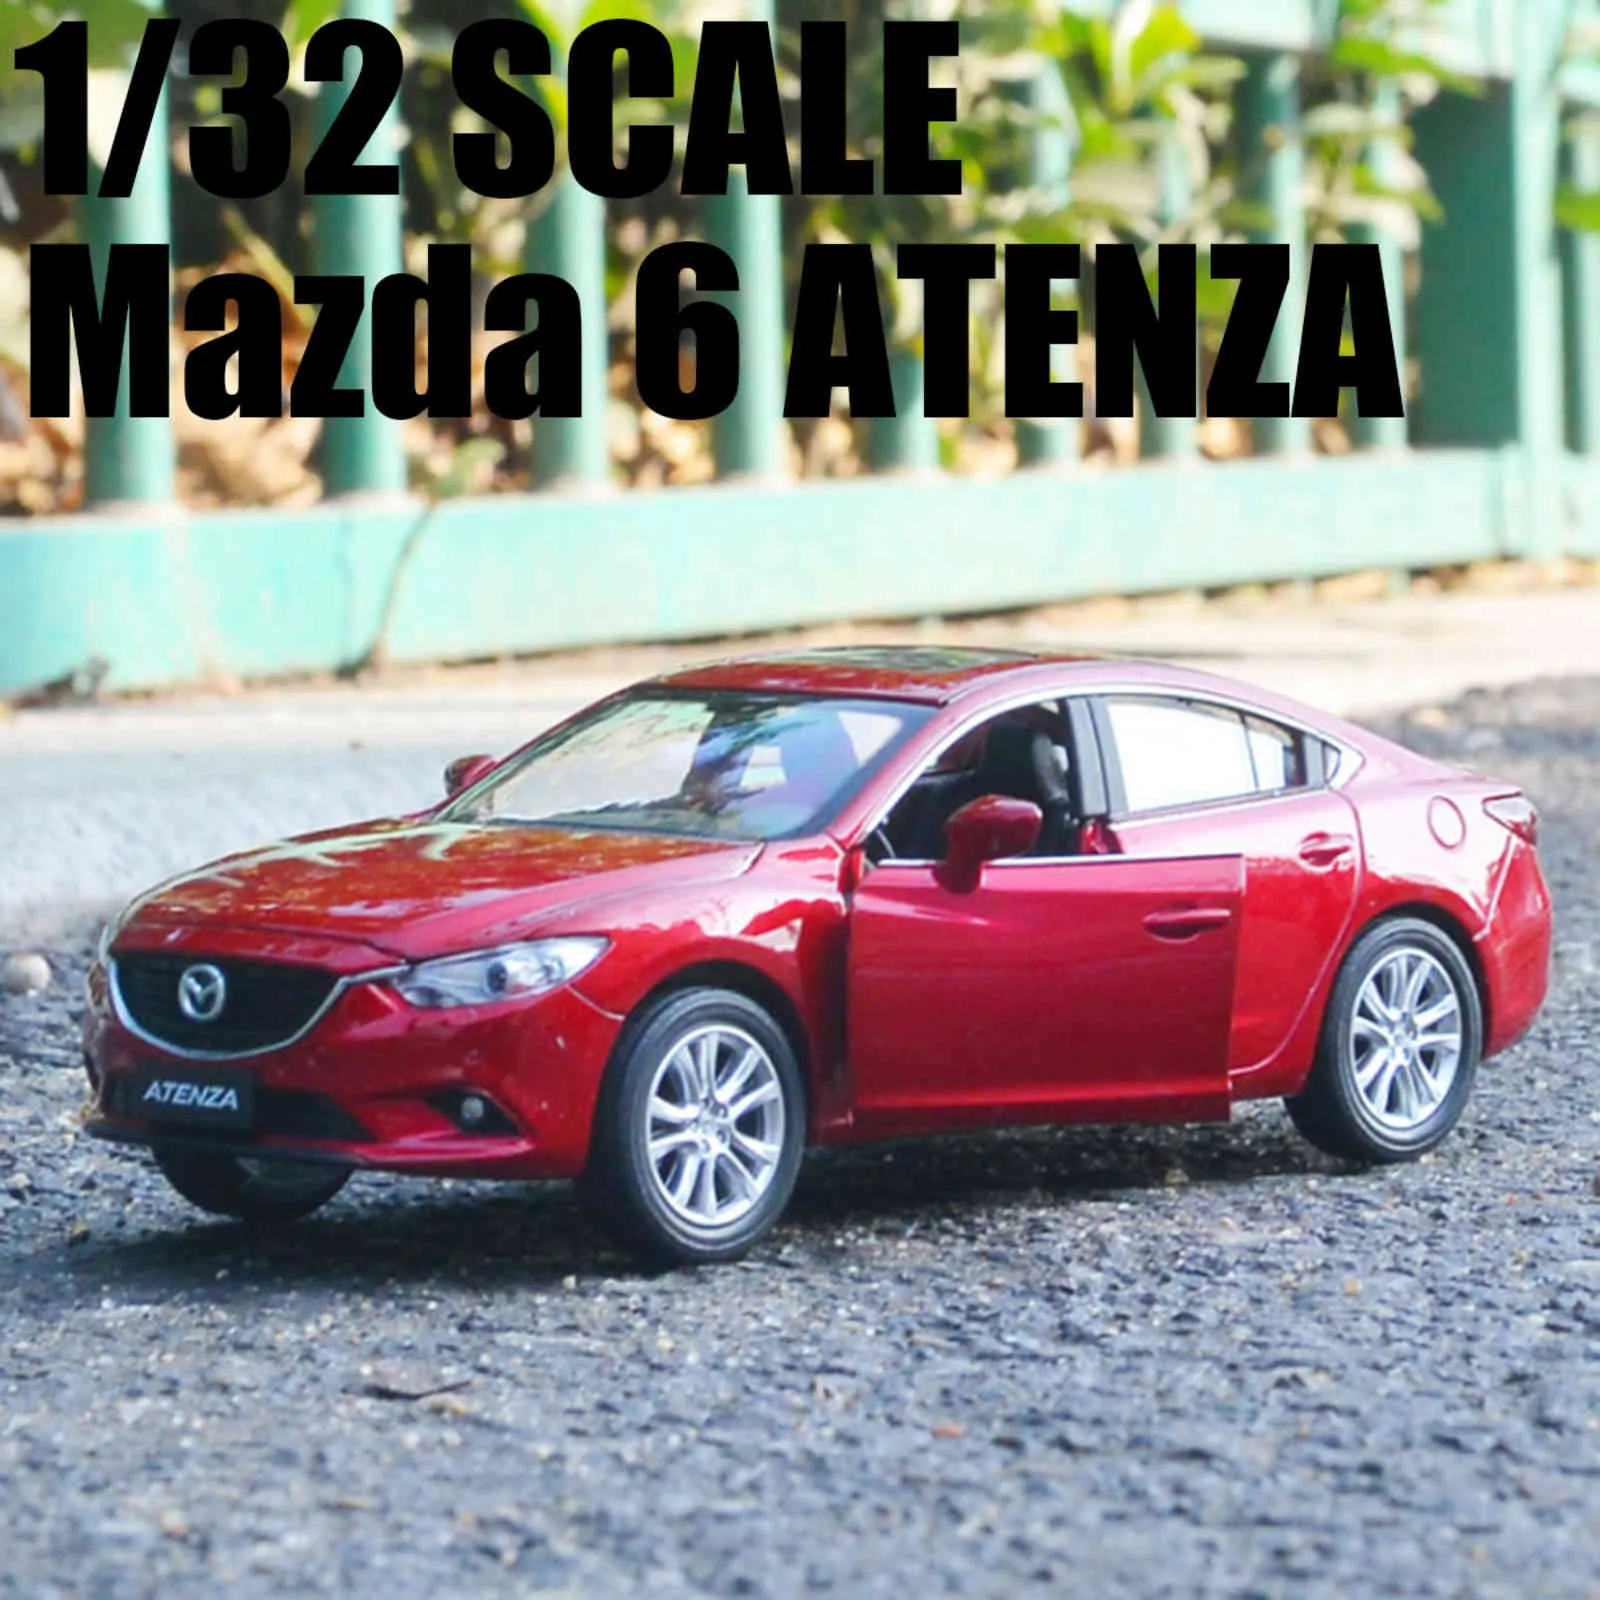 Mazda 6 Atenza 132 Alloy Car Die Casting Toys With Sound Collection Leverans Helt ny 202147984938647330